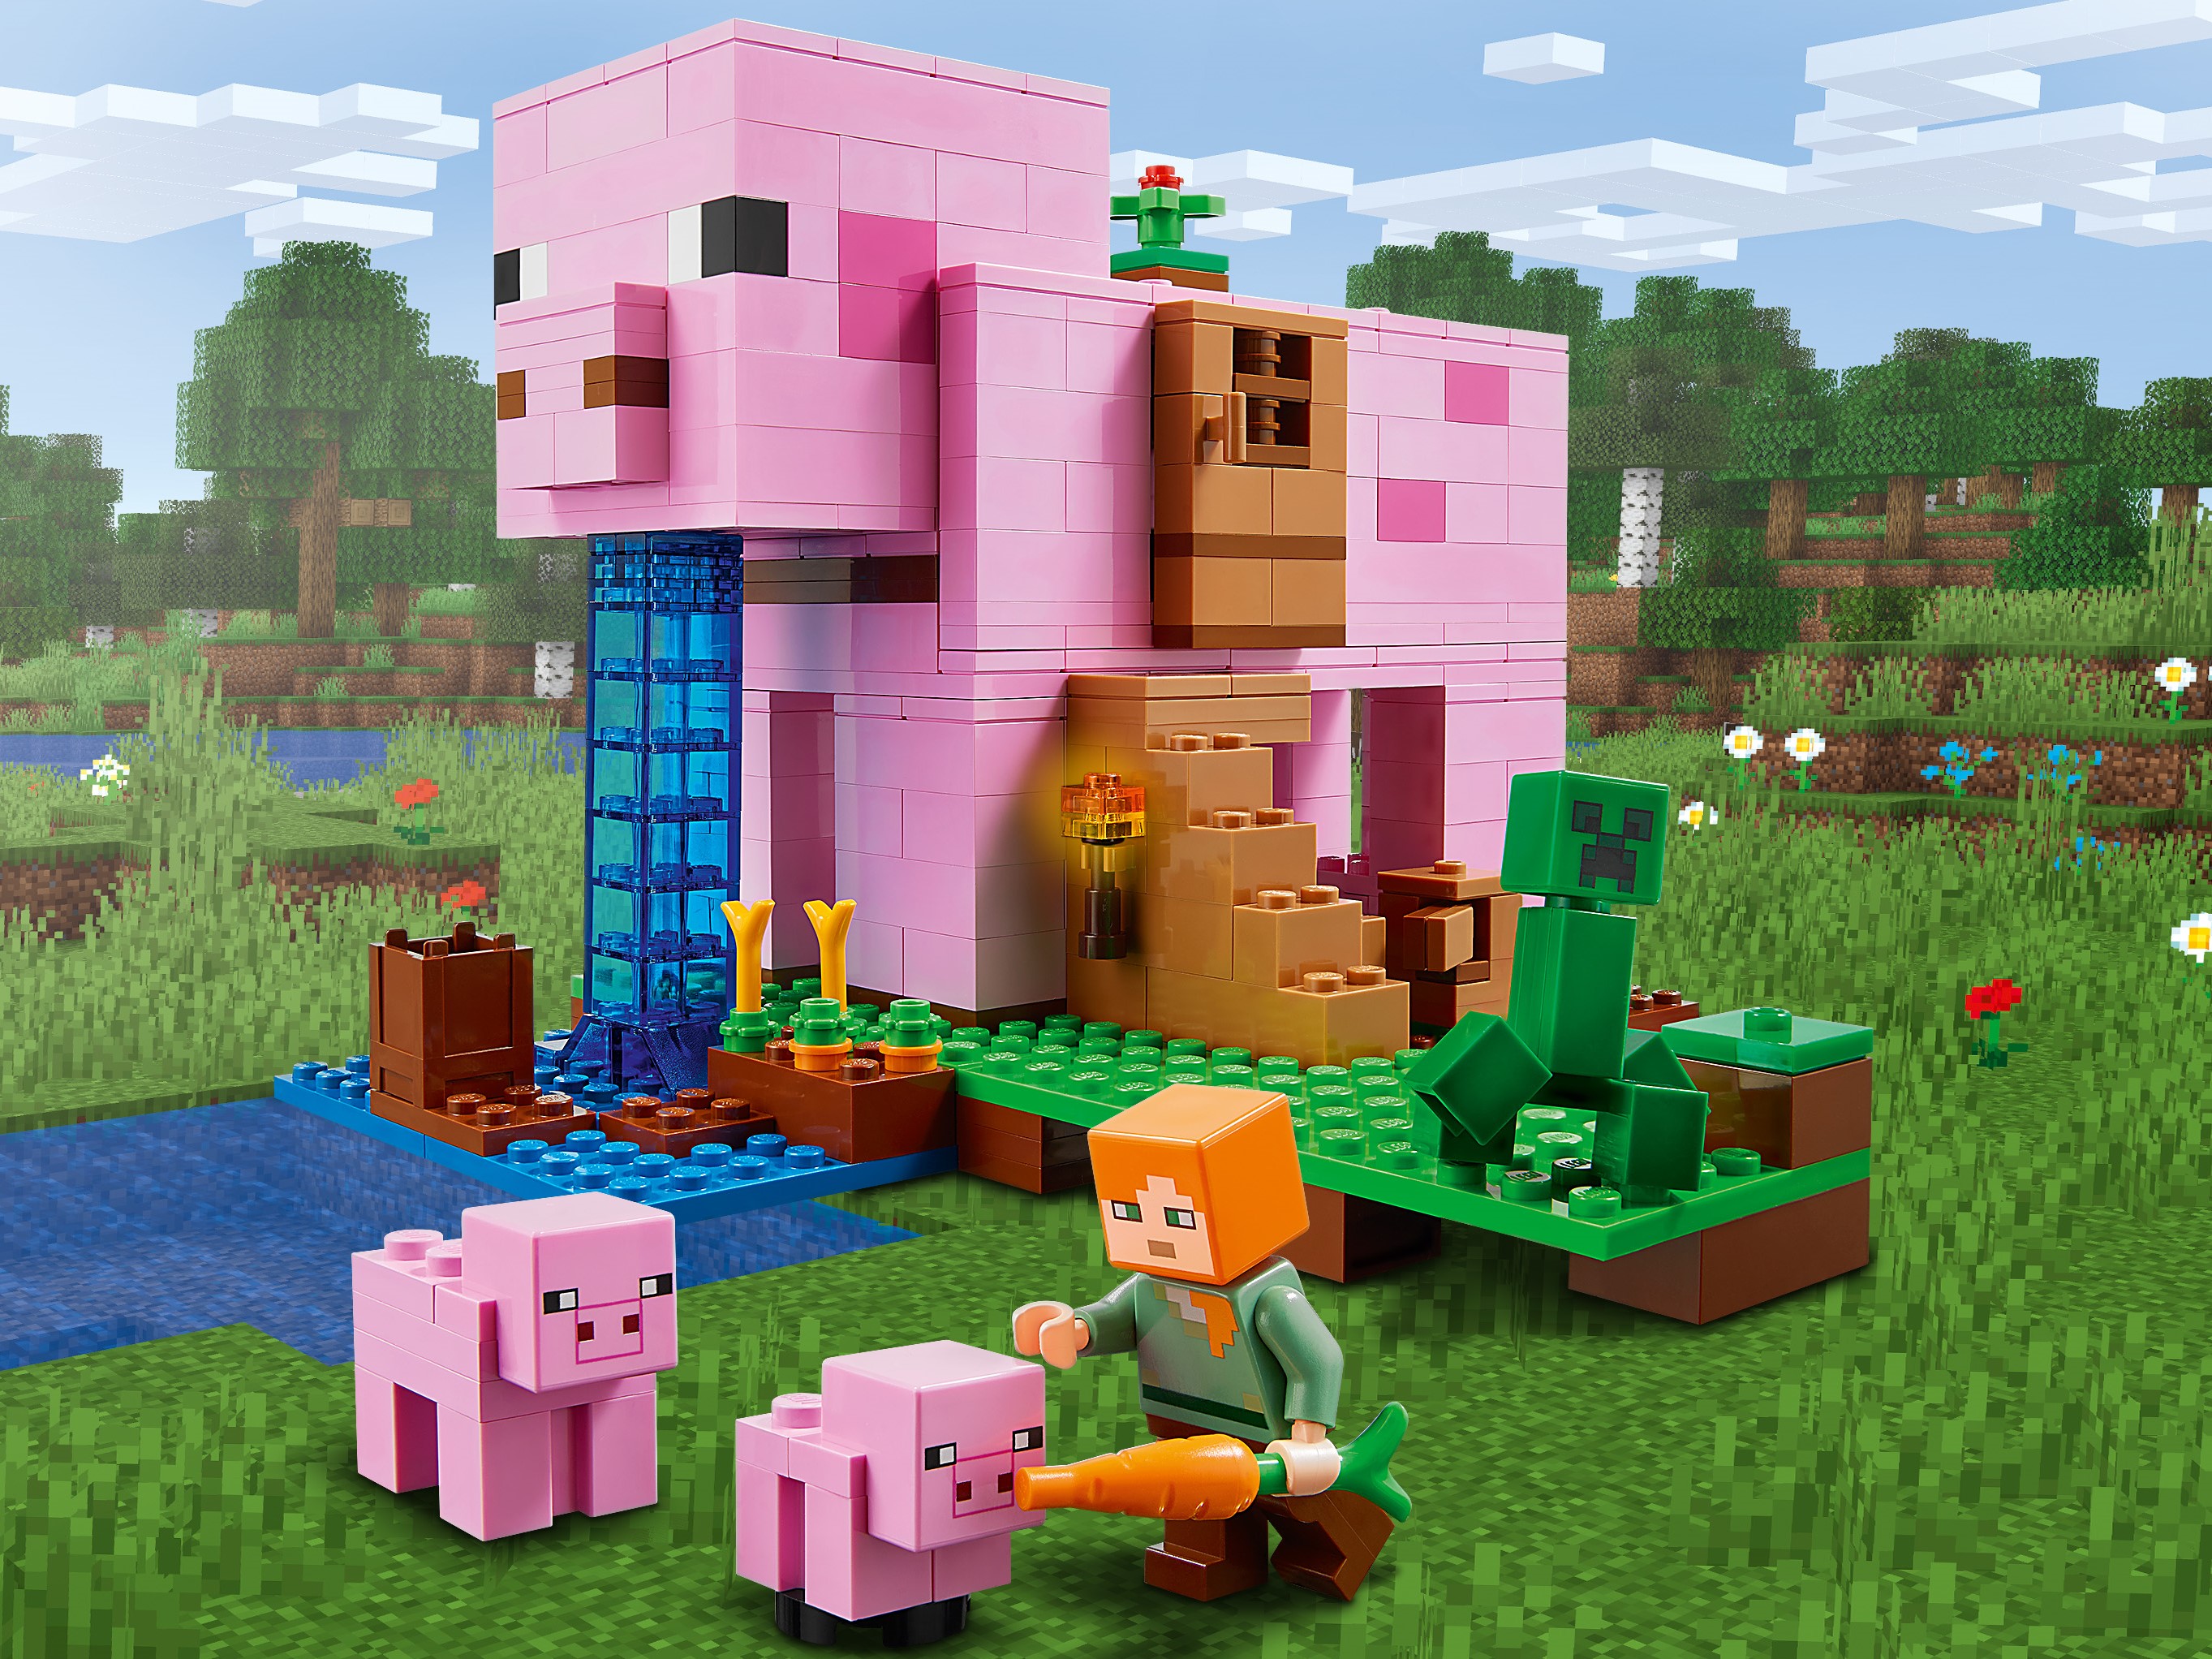 LEGO Minecraft The Pig House 21170 Building Kit for sale online 490 Pieces 